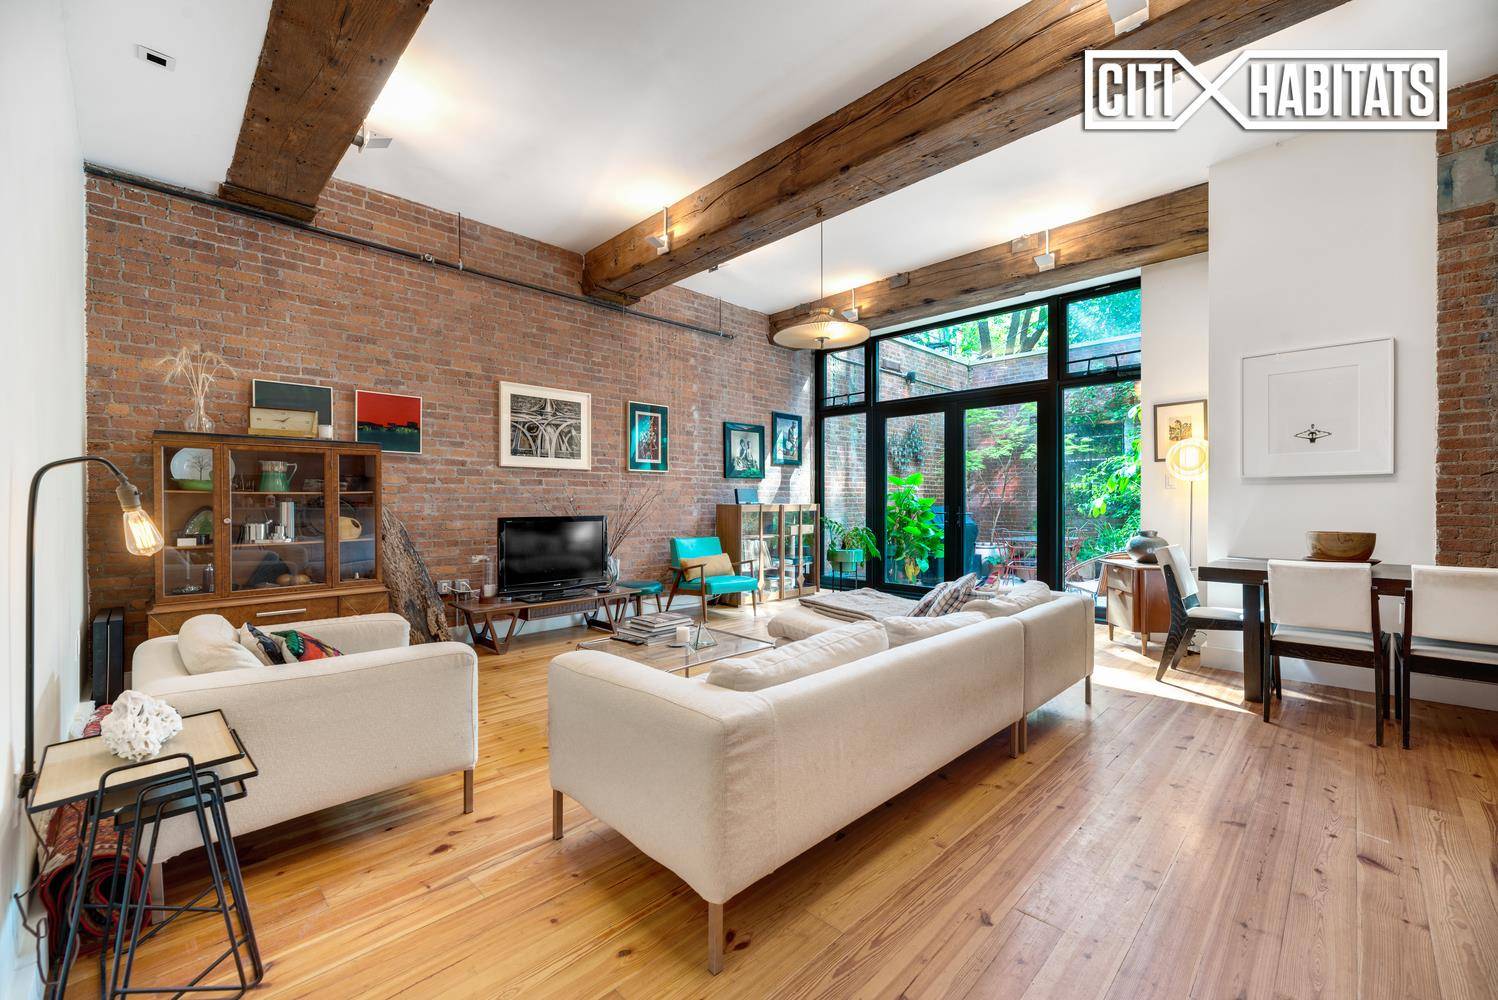 RARE 1220 square foot Two Bedroom Condo Loft for rent with SECLUDED GARDEN in Prime Northside Williamsburg !